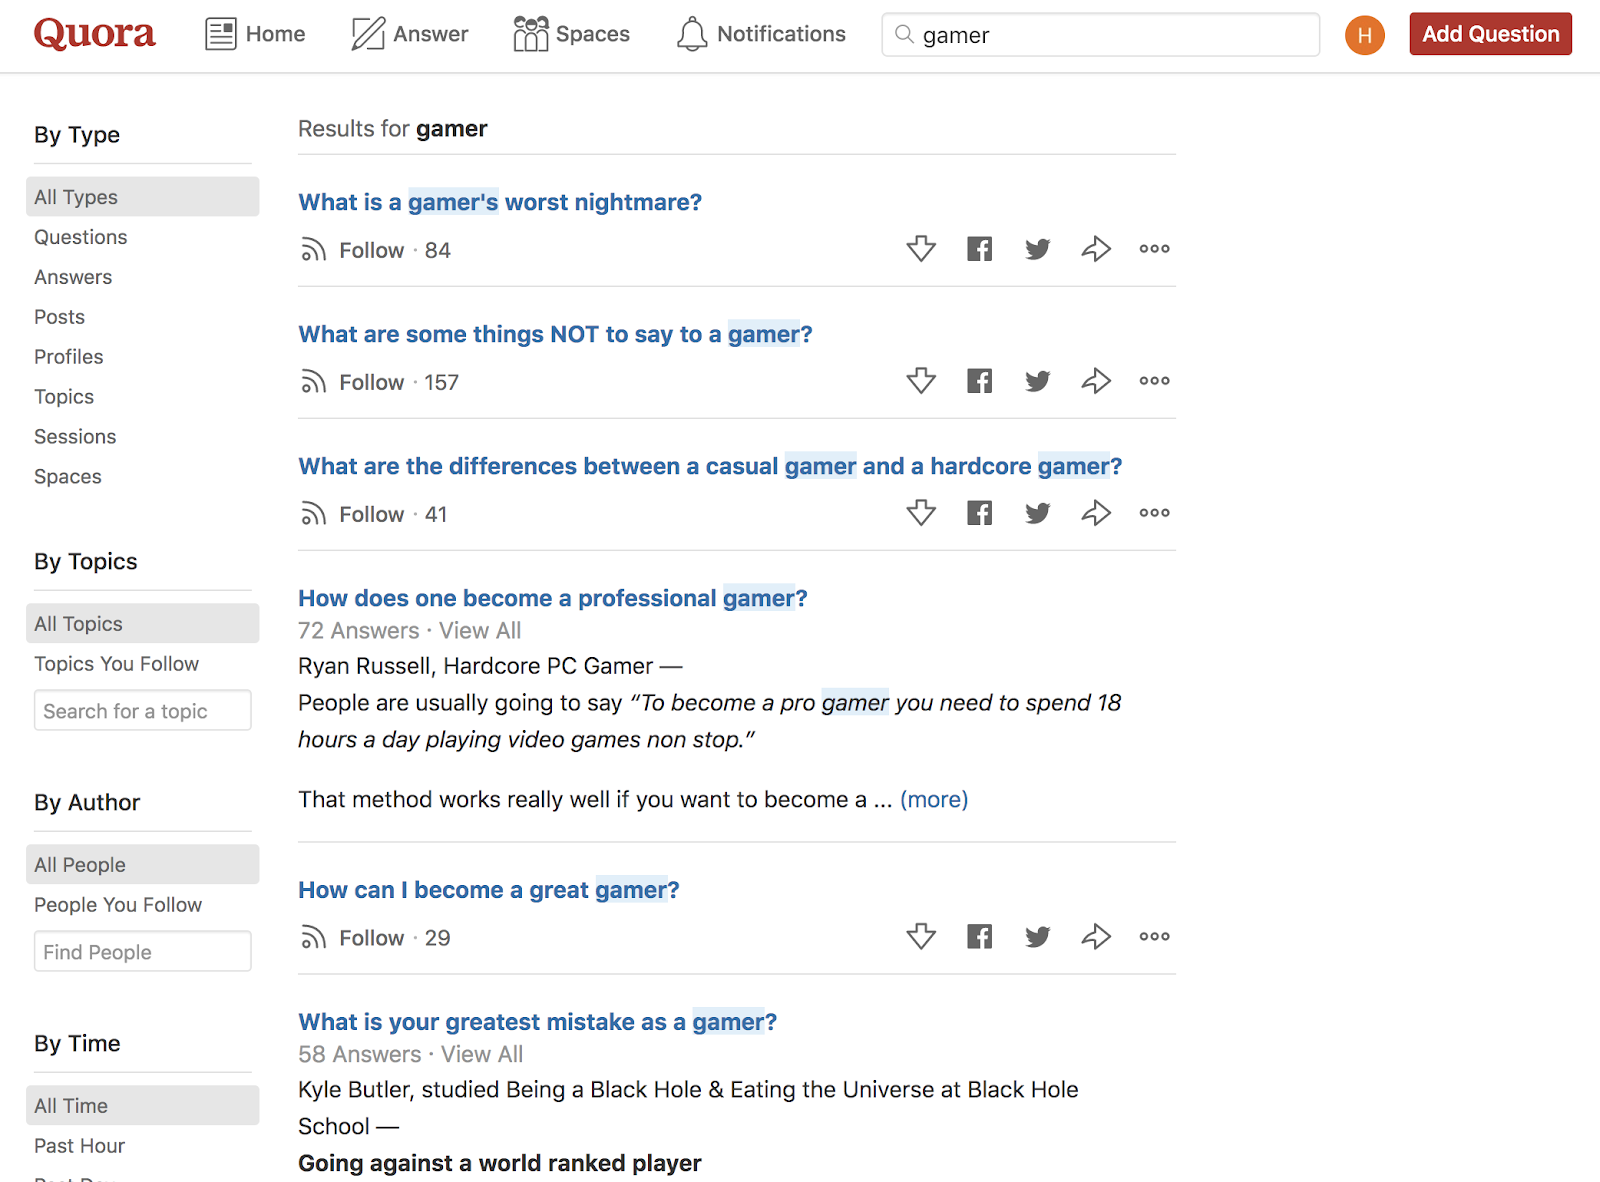 Example of Quora Search to Find Topics Your Target Audience Cares About (Screenshot)